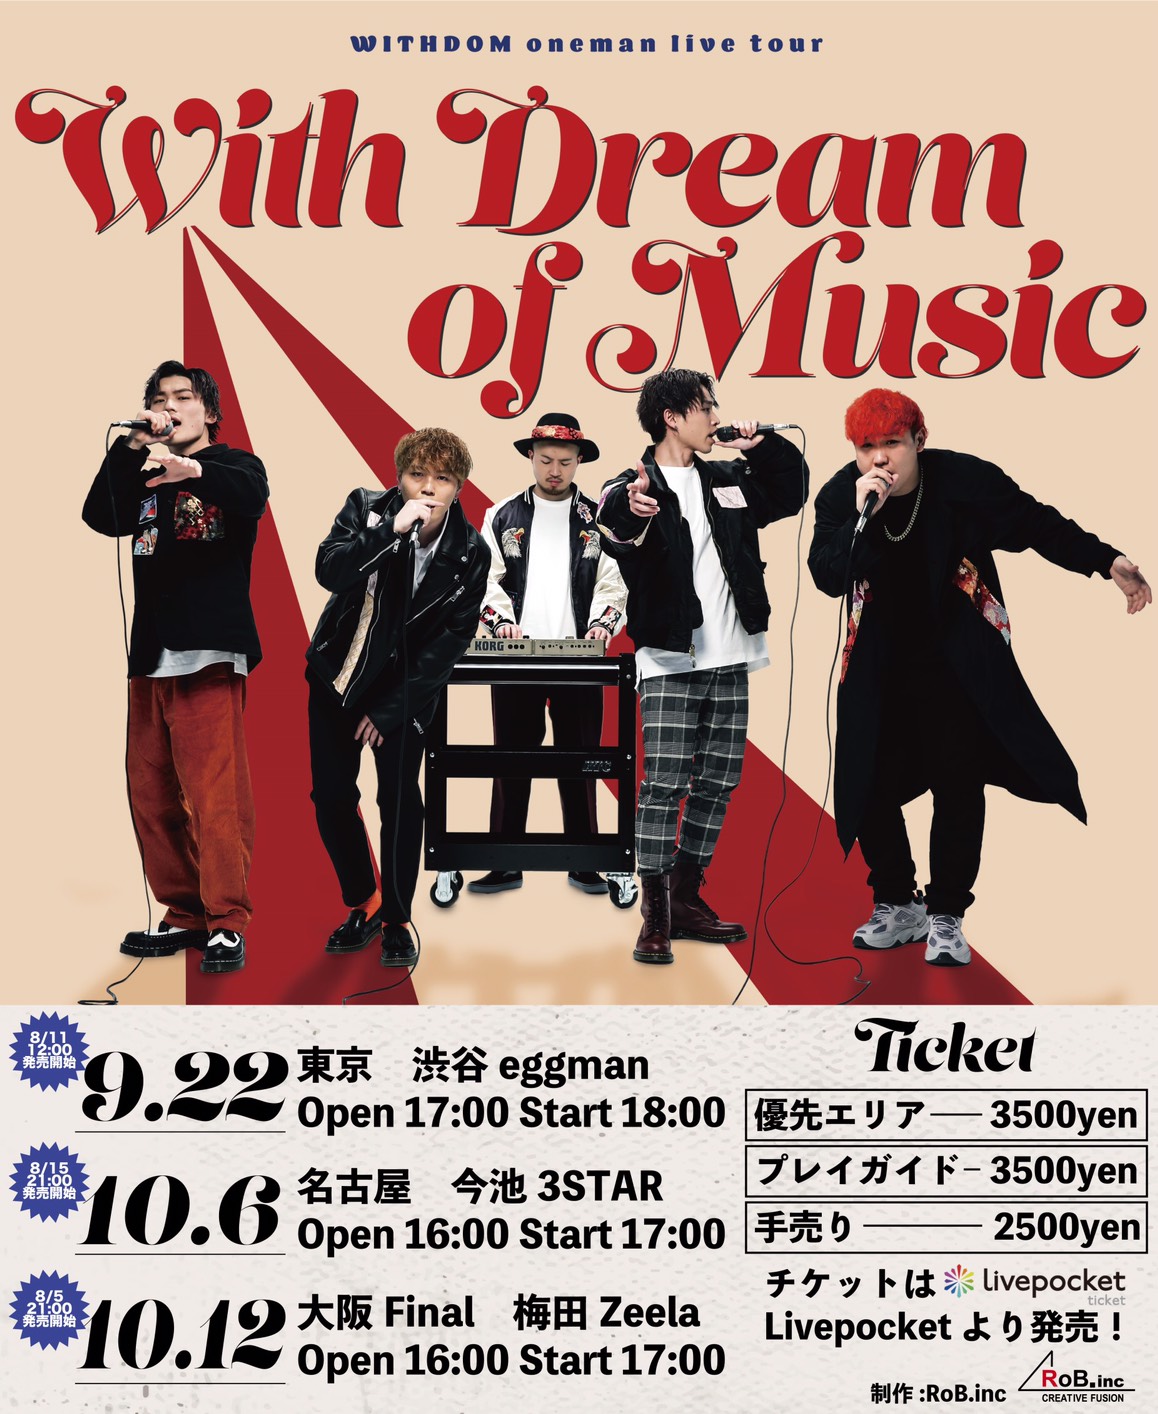 WITHDOM oneman live tour "With Dream of Music" in TOKYO